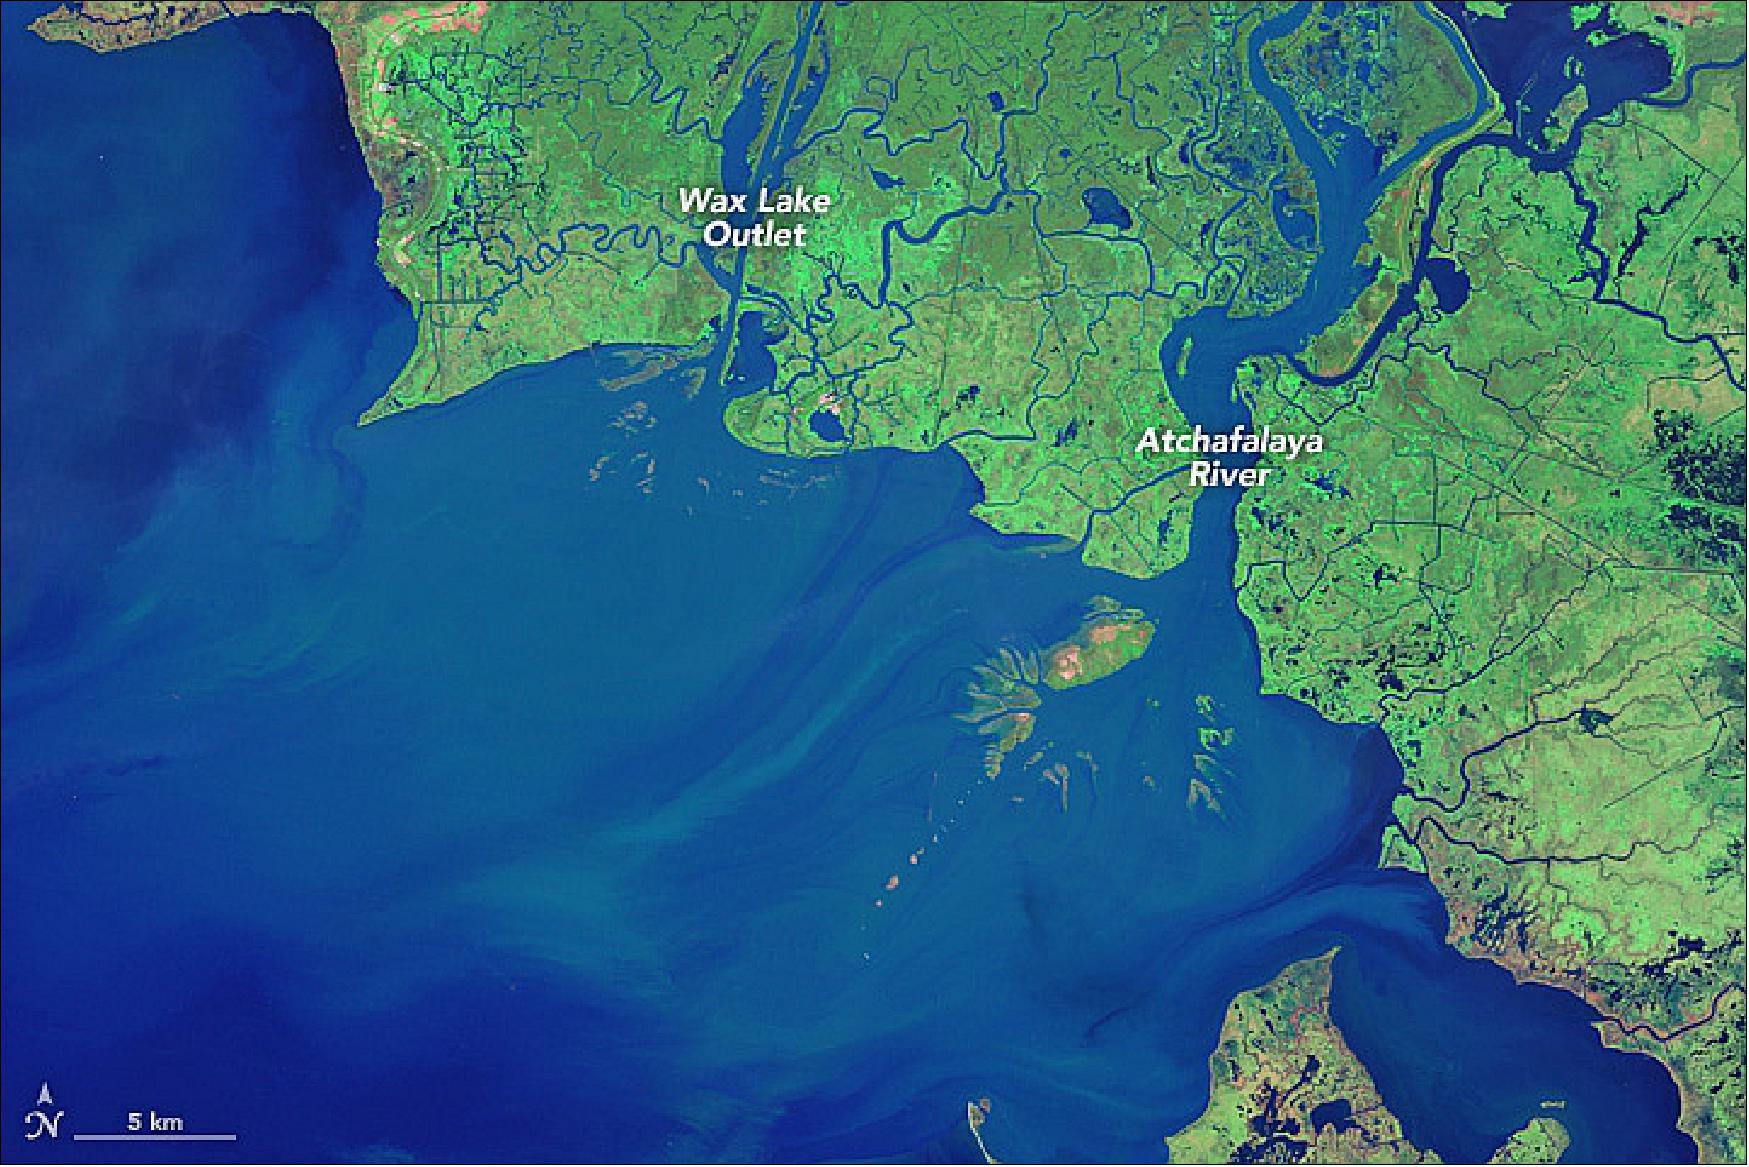 Figure 40: The Atchafalaya River Delta and Wax Lake Outlet, acquired by Landsat-5 on Nov. 4, 1984 (image credit: NASA)